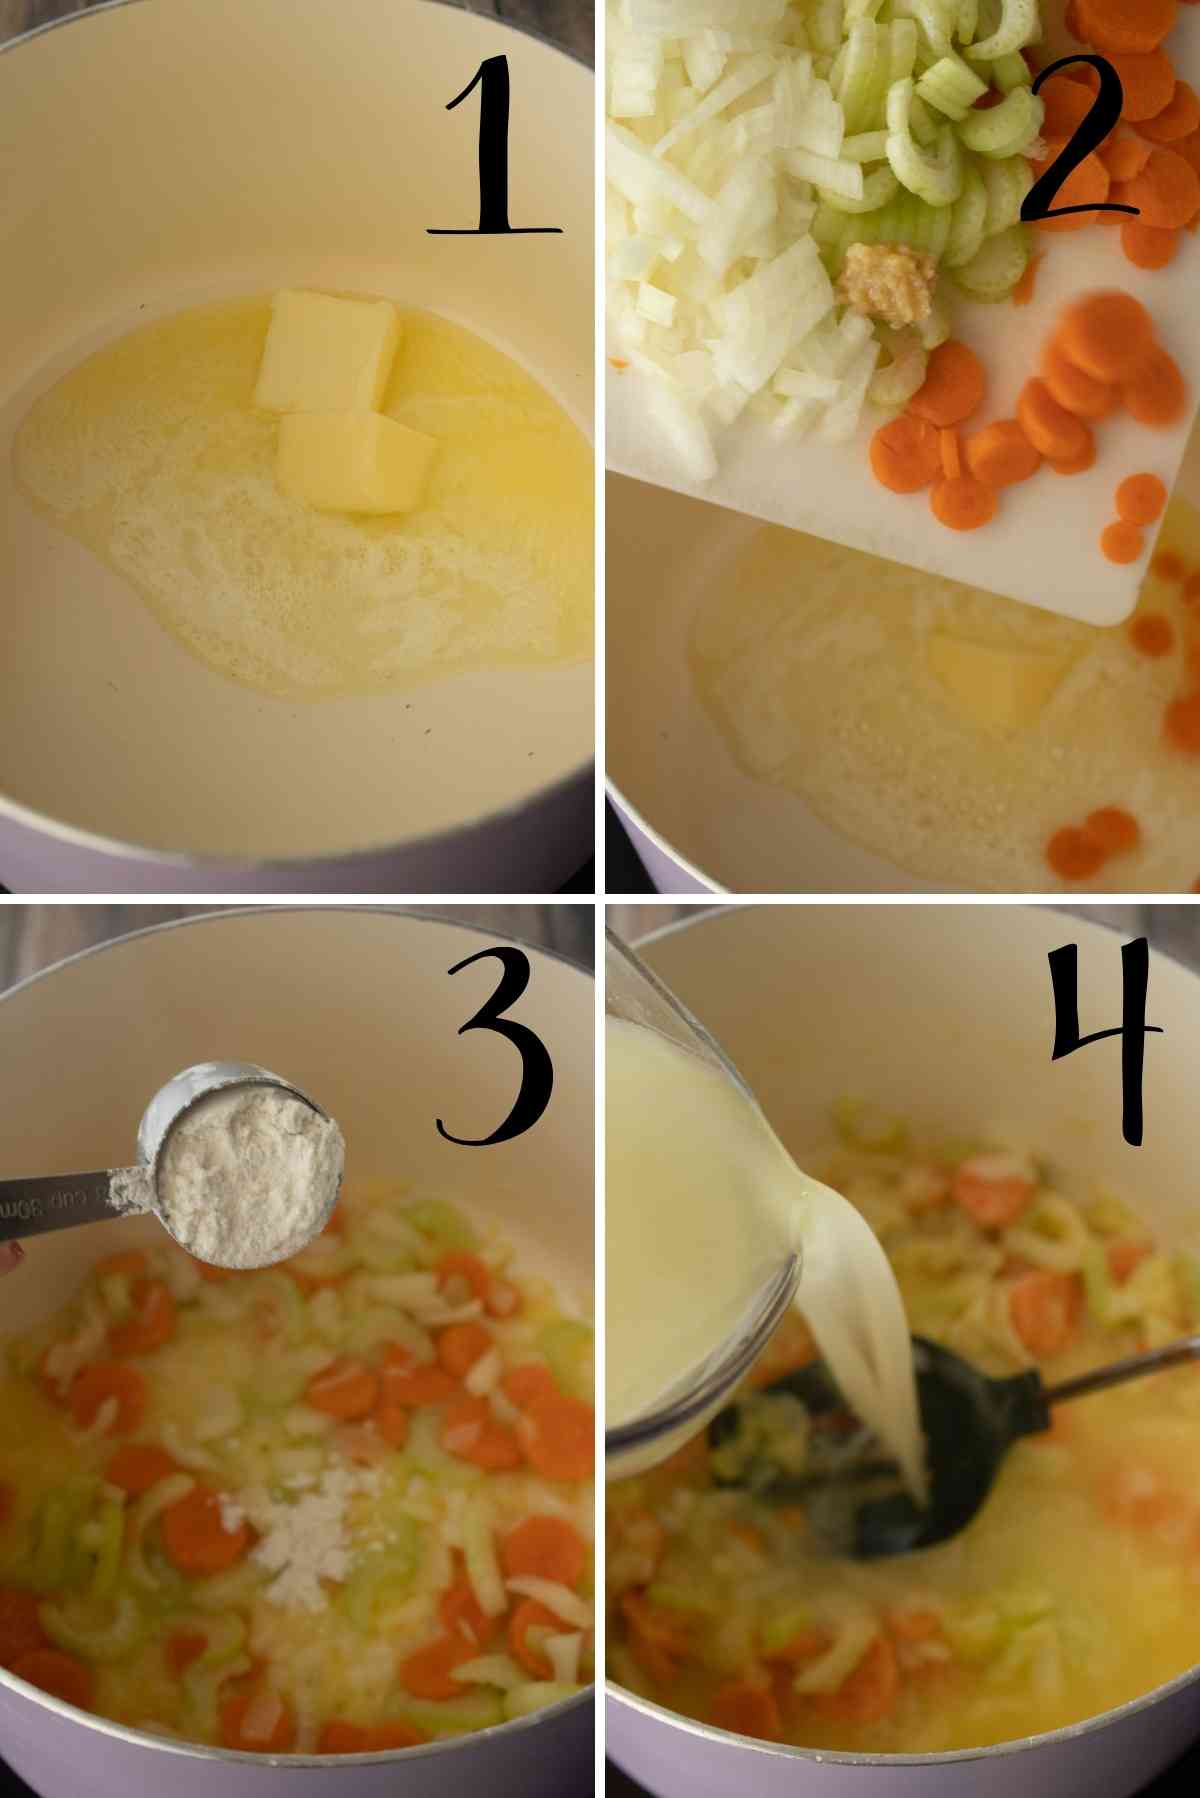 Sauté the carrots, celery, and onions.  Make a roux and add the chicken broth.